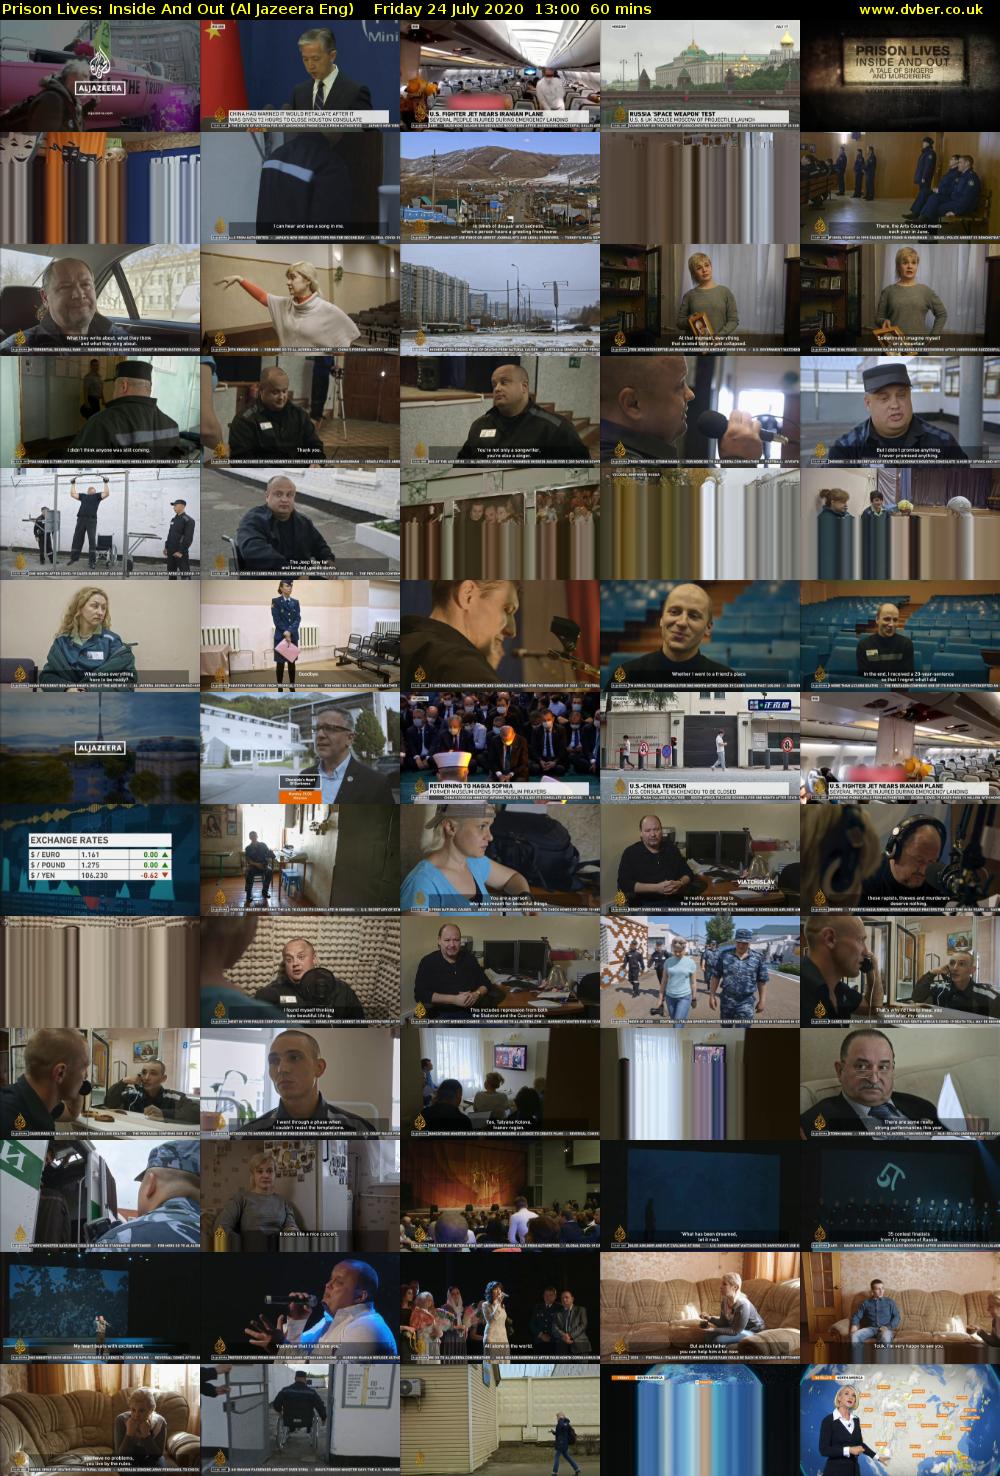 Prison Lives: Inside And Out (Al Jazeera Eng) Friday 24 July 2020 13:00 - 14:00